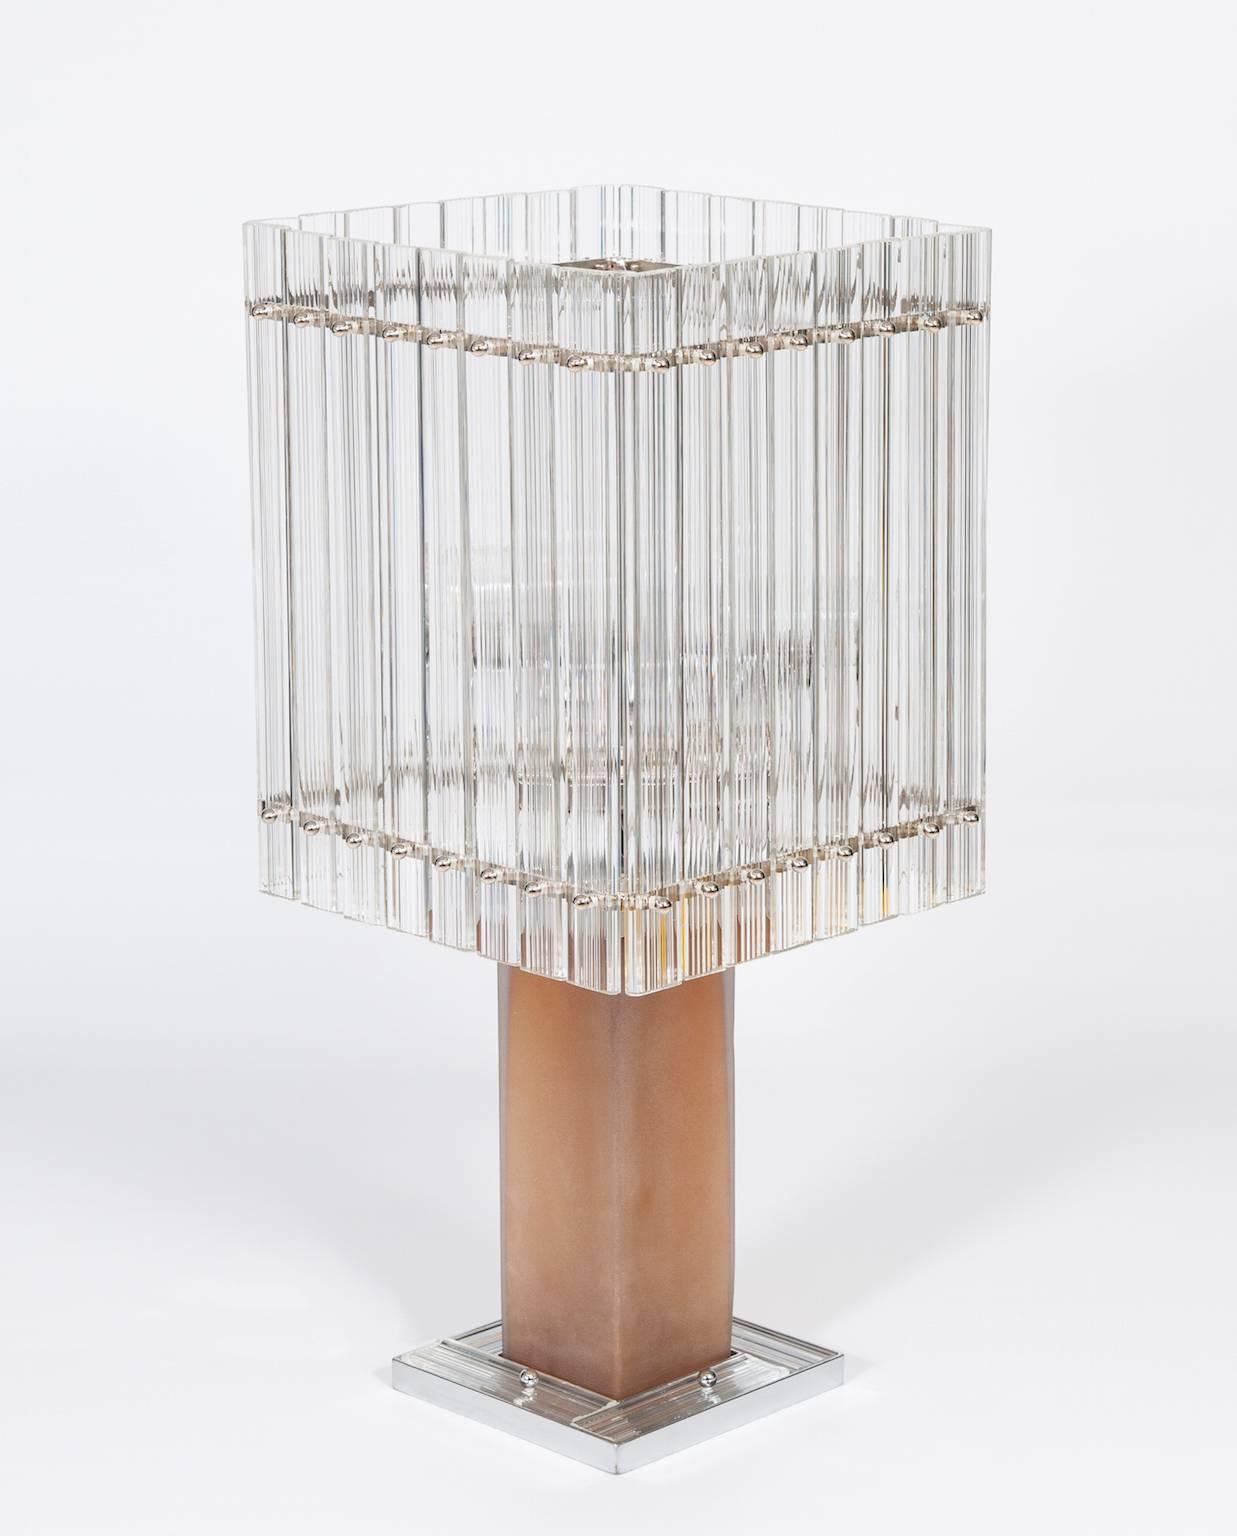 Pair of Italian table lamps in Transparent Murano glass, circa 1980s.
These amazing table lamps were made circa 1980s in the Venetian island of Murano, Italy. Each lamp is composed of a metal base, four transparent glass ribbed slats, an